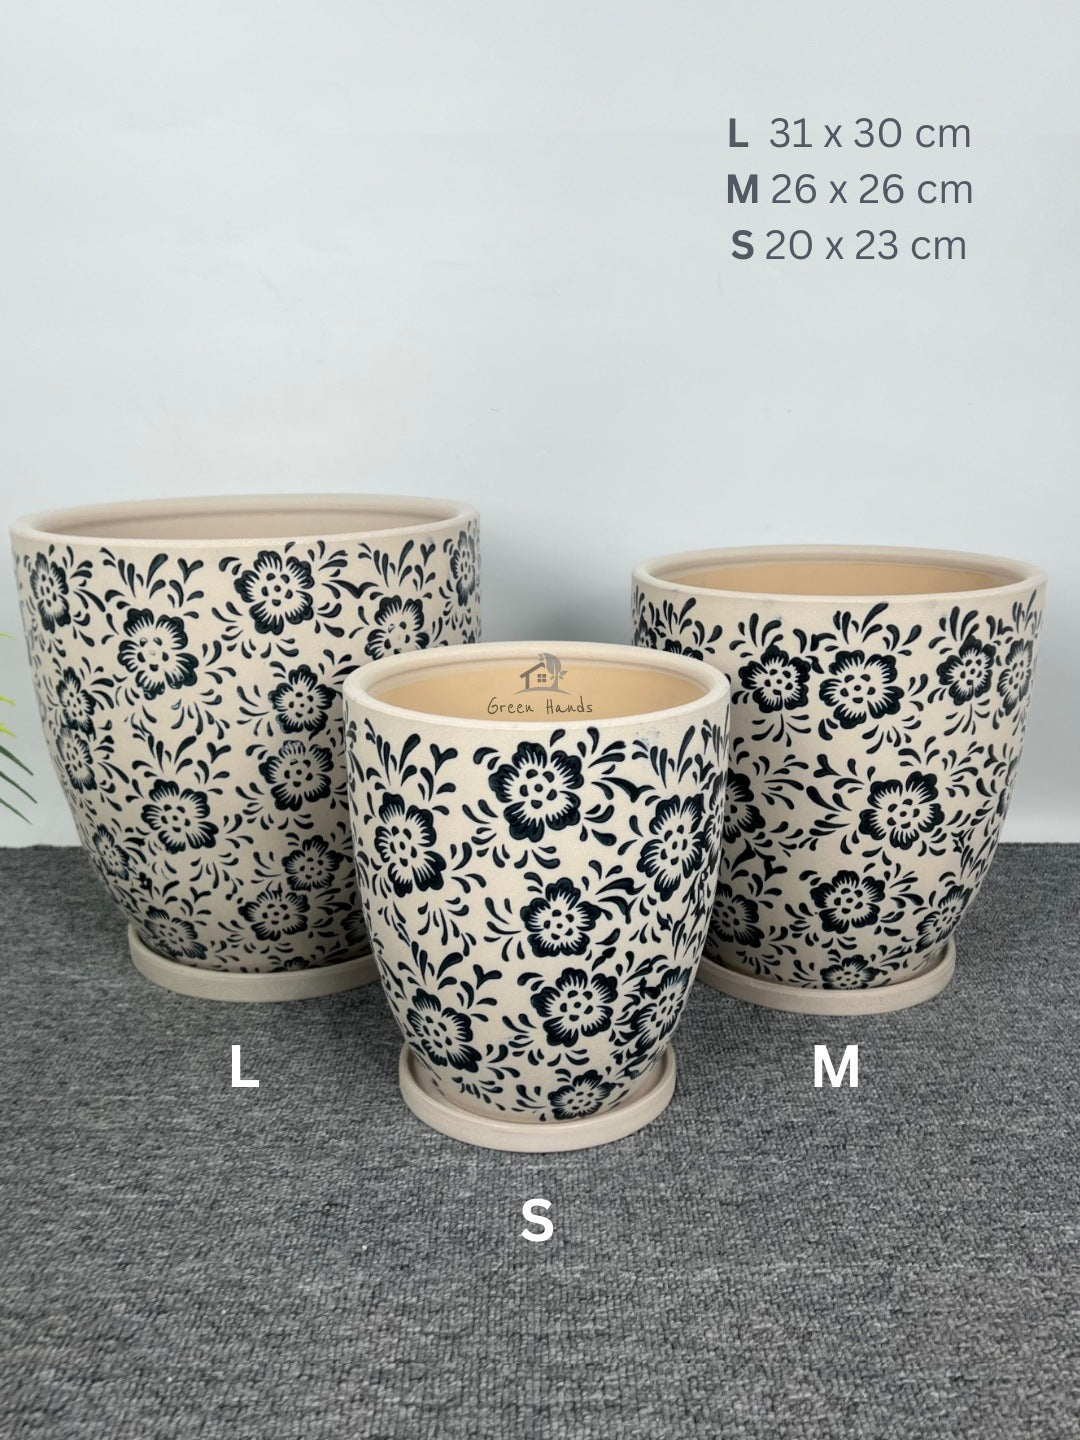 Japanese Imari Art-Inspired Floral Ceramic Pots in Dubai & Abu Dhabi: Ideal for Modern Interiors and Sophisticated Rooms with Drain Hole and Matching Ceramic Base Plates